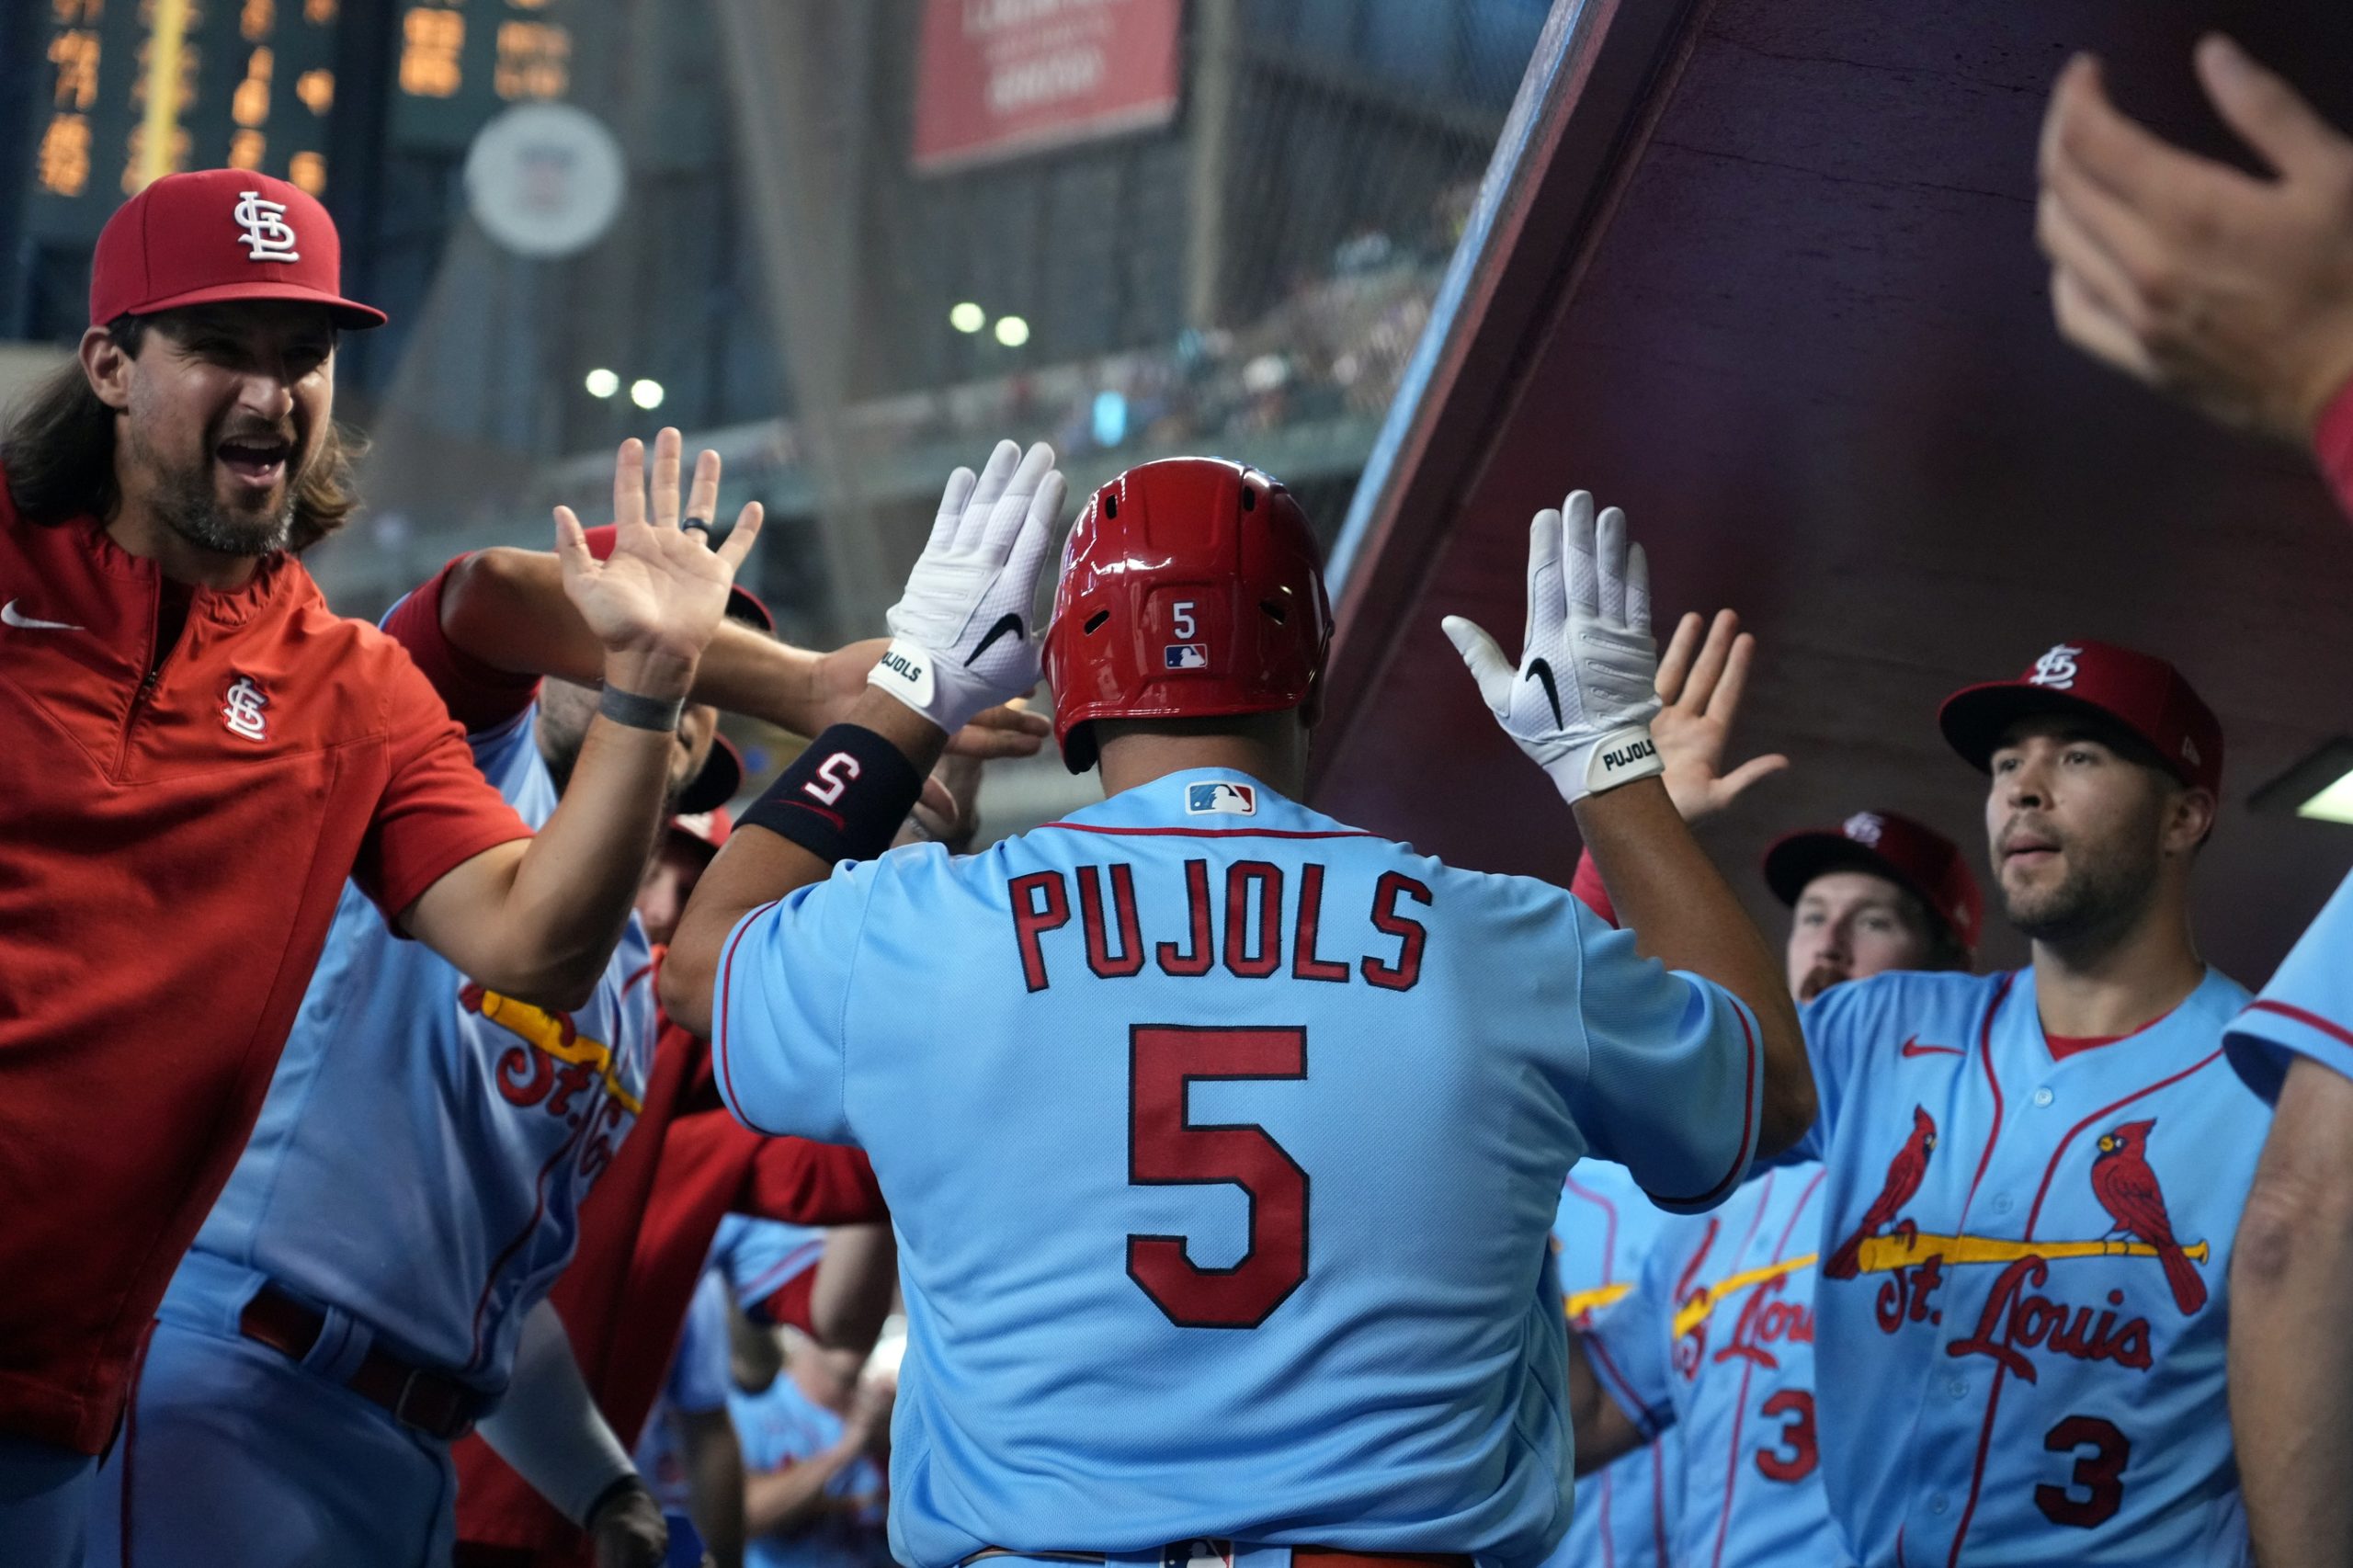 Bernie On The Cardinals: The Summer Of Pujols Is More Special Than